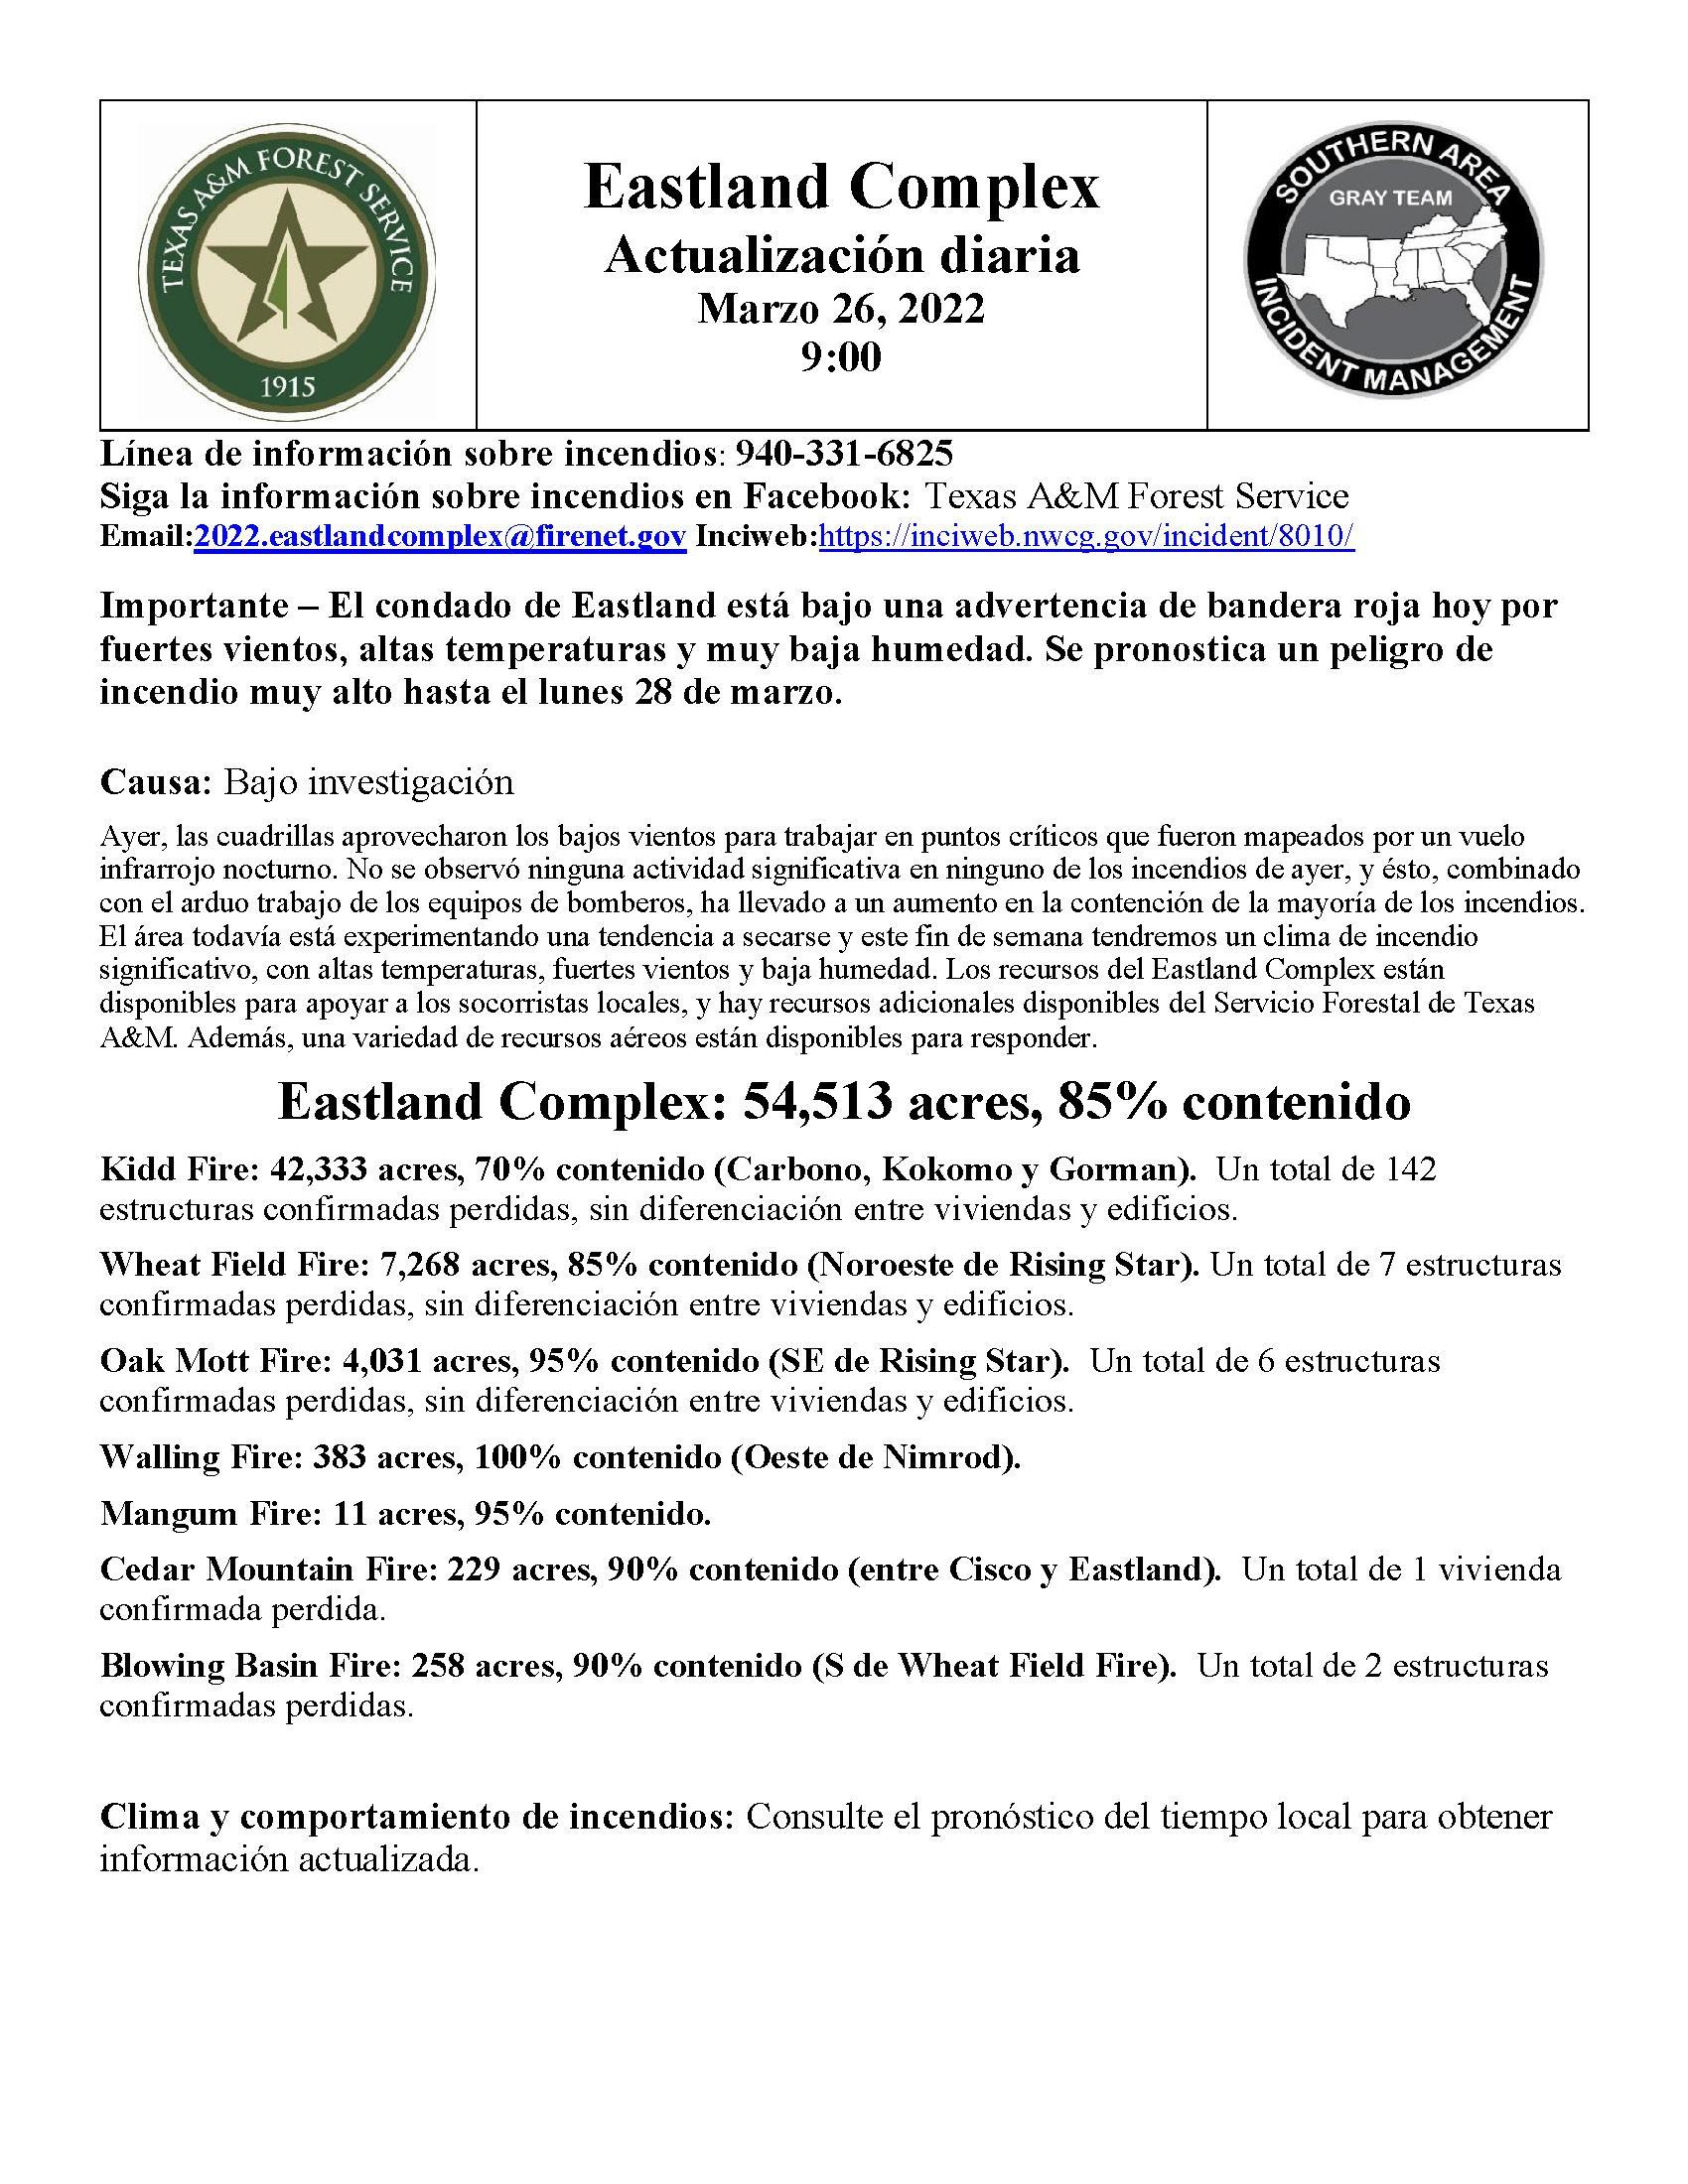 The document contains the March 26 daily update of the Eastland Complex fire, in spanish.